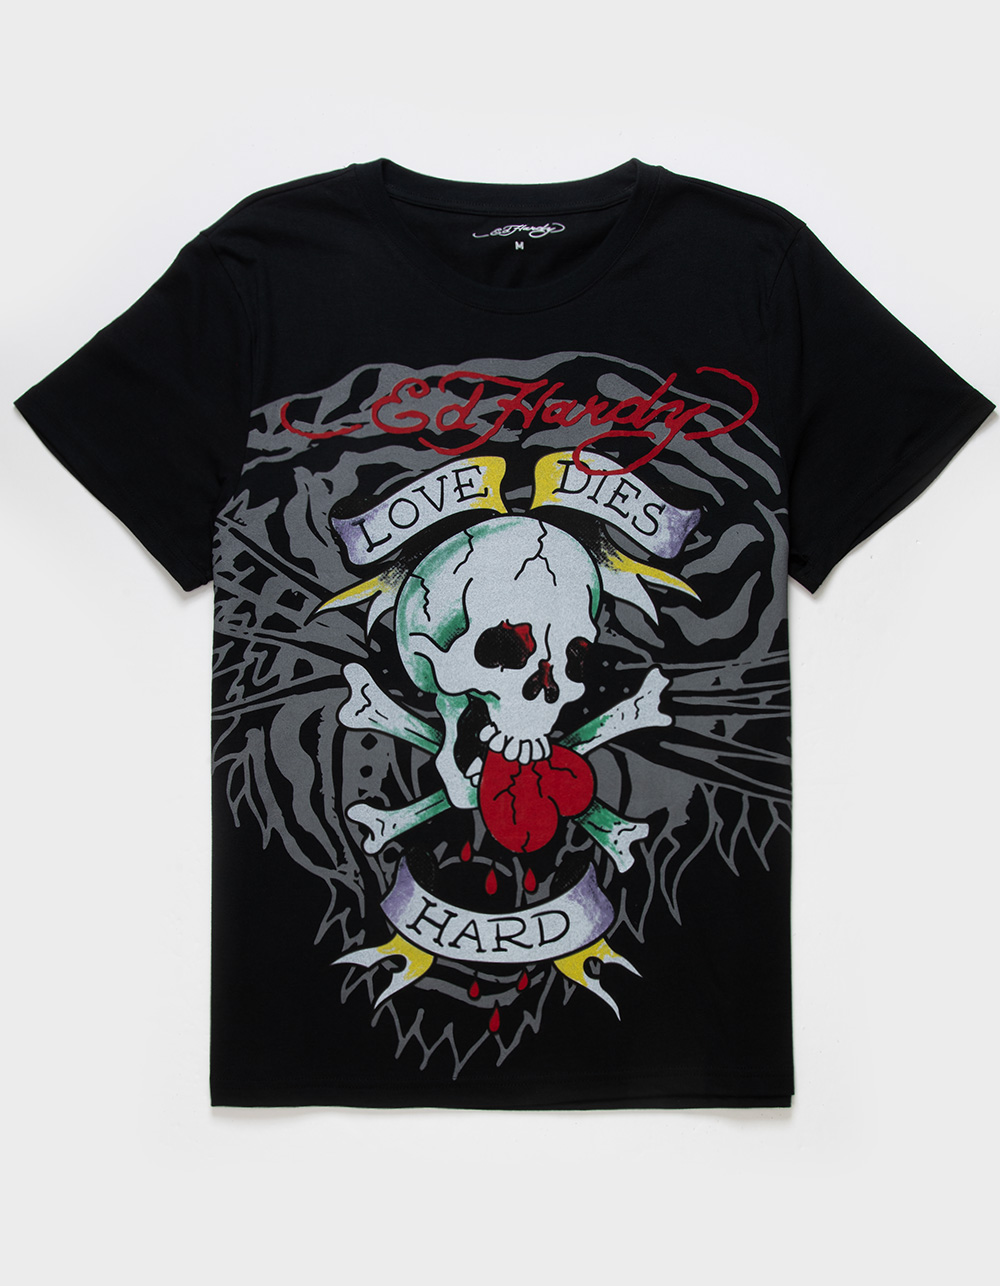 Ed Hardy skater double sleeve relaxed t-shirt